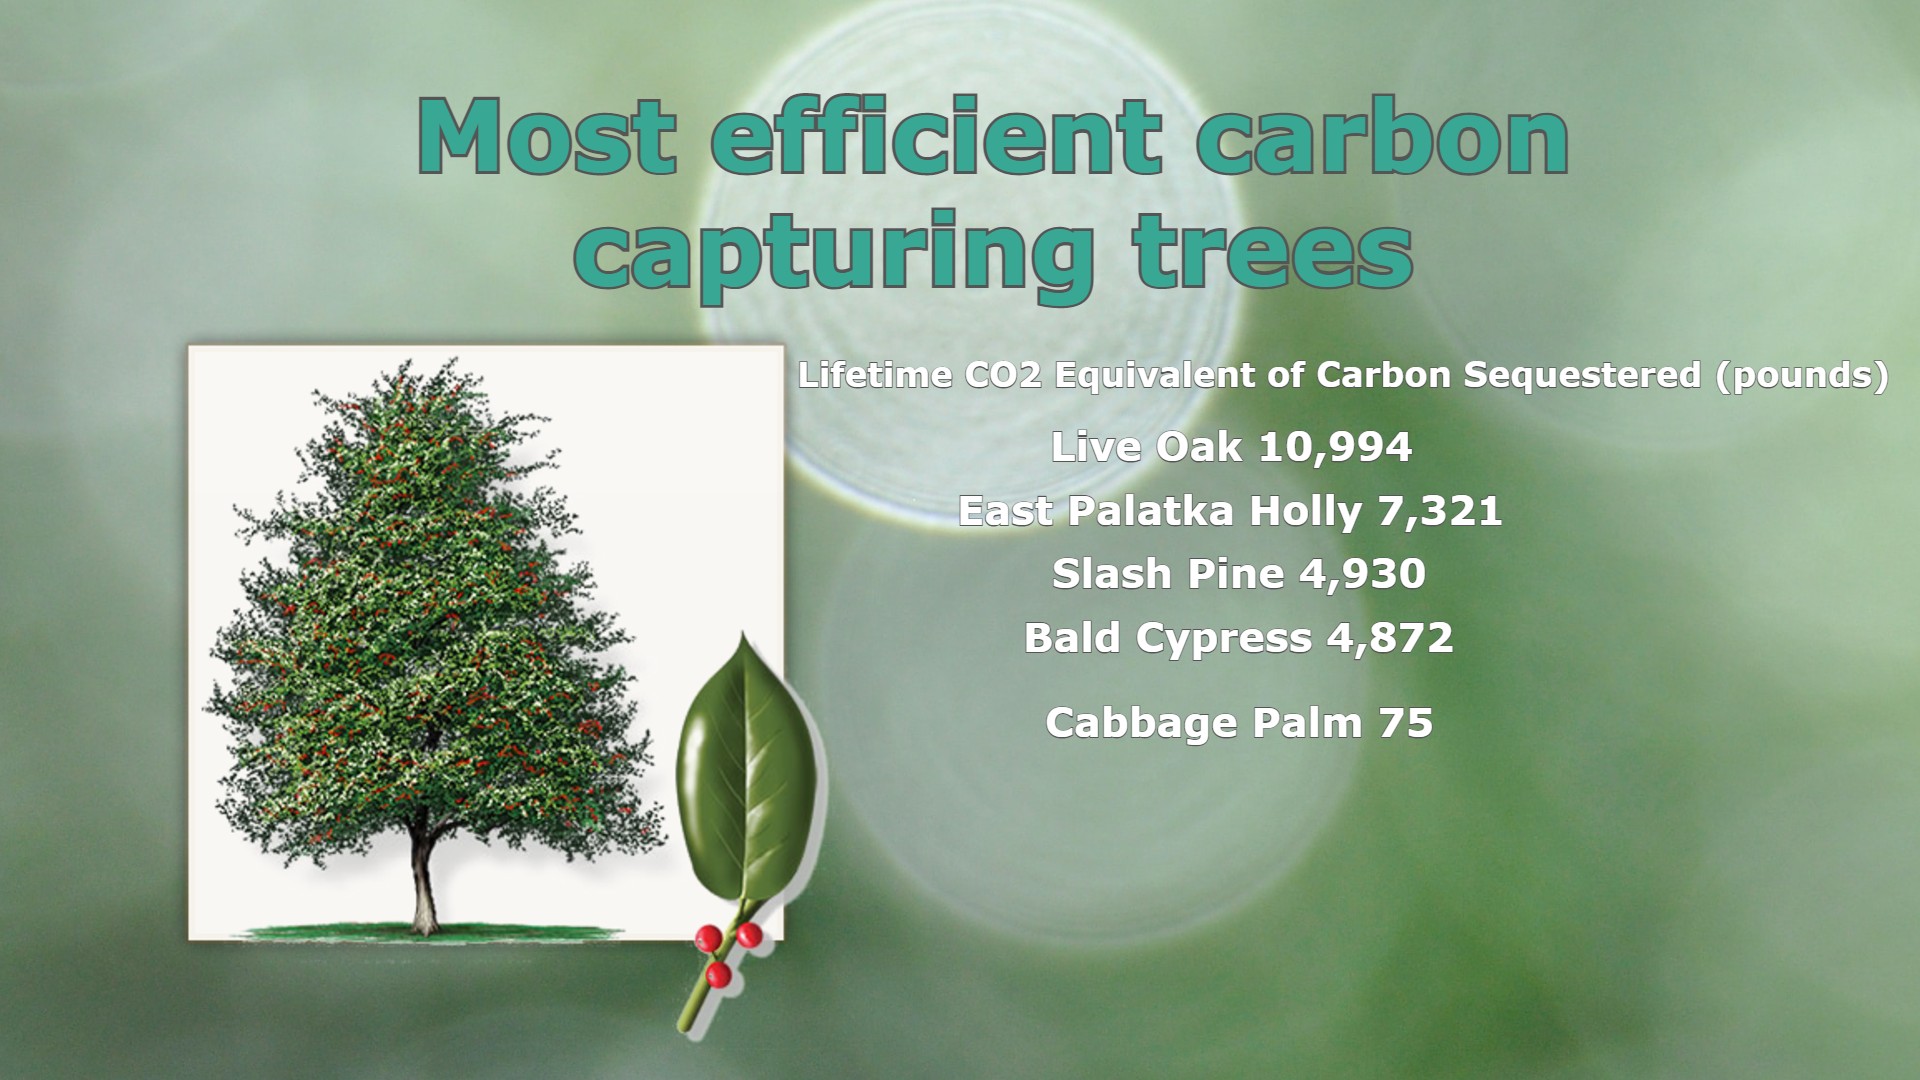 Which tree removes most CO2?